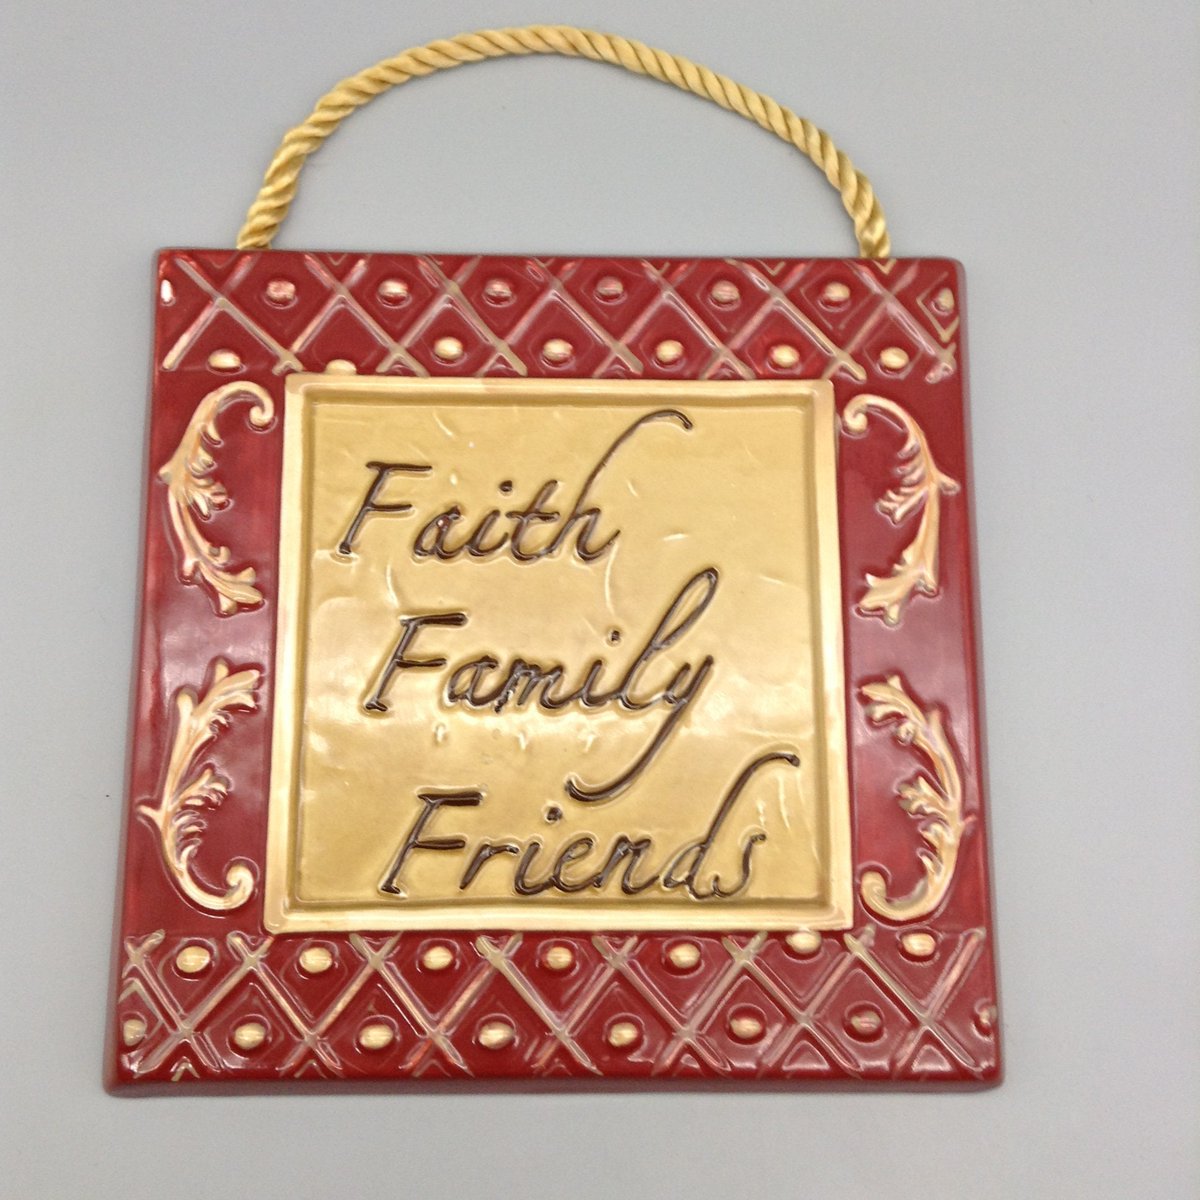 Excited to share the latest addition to my #etsy shop: Faith, Family and Friends Ceramic Plaque etsy.me/3QCknBF #red #ceramicspottery #gold #bedroom #plaque #faithfamilyfriends #ceramicplaque #satincording #kitchenplaque